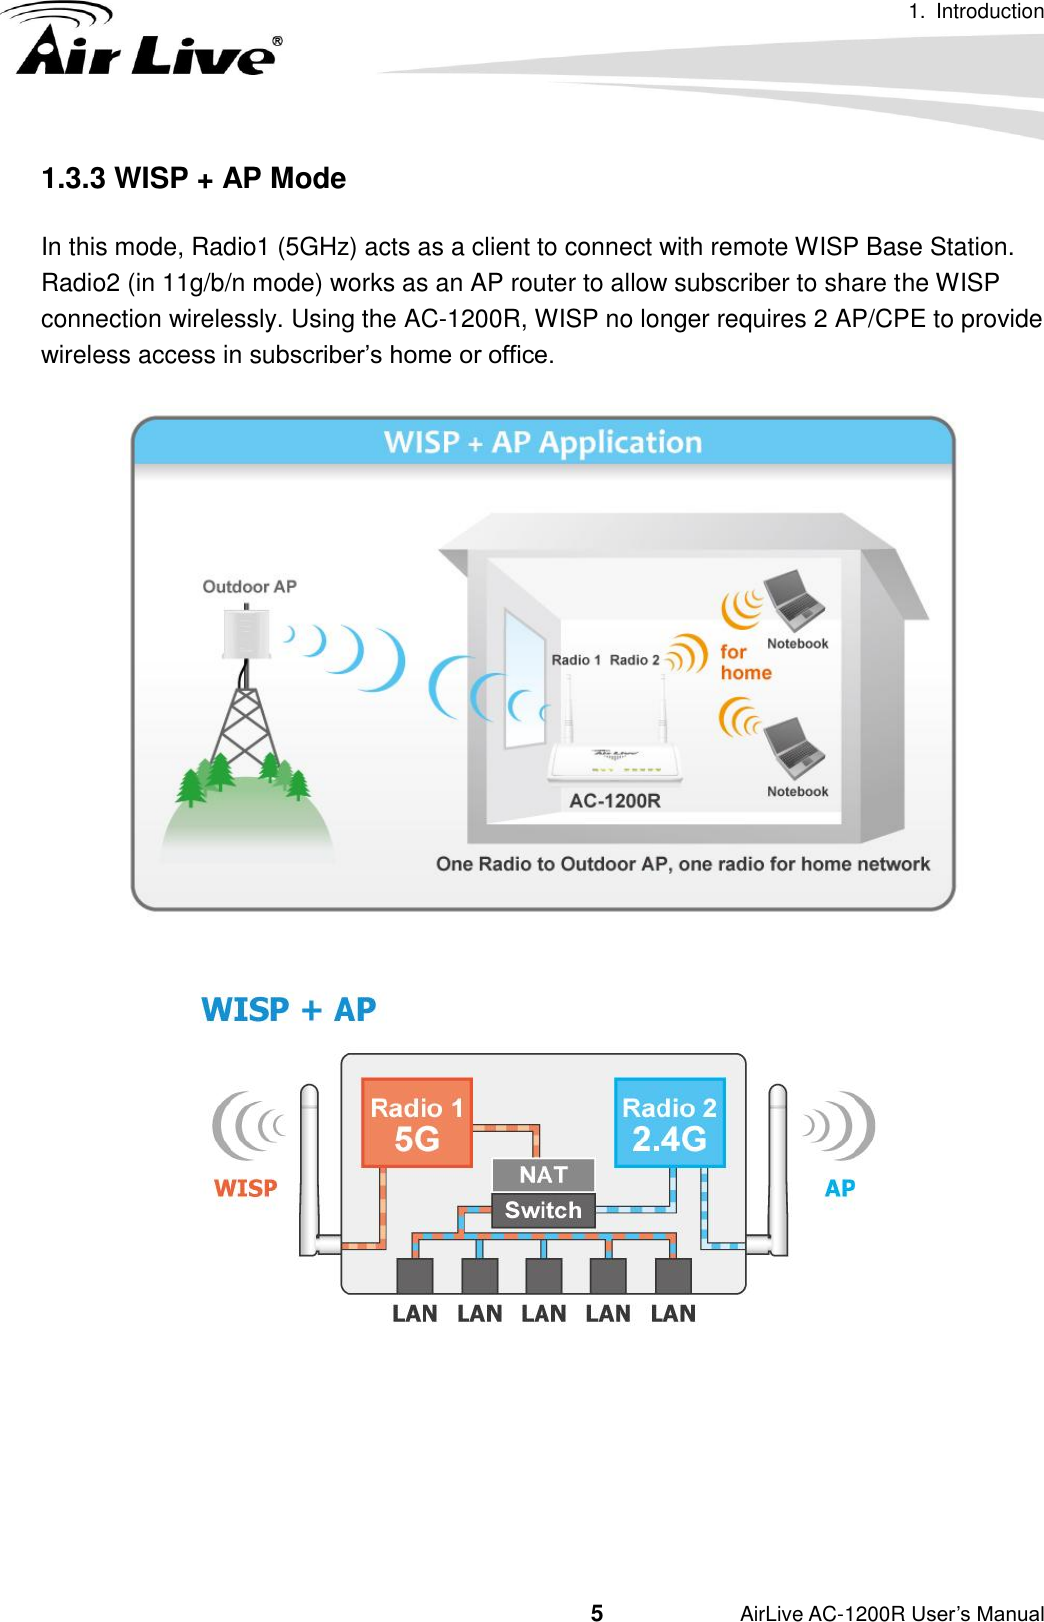 1.  Introduction                                         5           AirLive AC-1200R User’s Manual 1.3.3 WISP + AP Mode In this mode, Radio1 (5GHz) acts as a client to connect with remote WISP Base Station.   Radio2 (in 11g/b/n mode) works as an AP router to allow subscriber to share the WISP connection wirelessly. Using the AC-1200R, WISP no longer requires 2 AP/CPE to provide wireless access in subscriber’s home or office.        